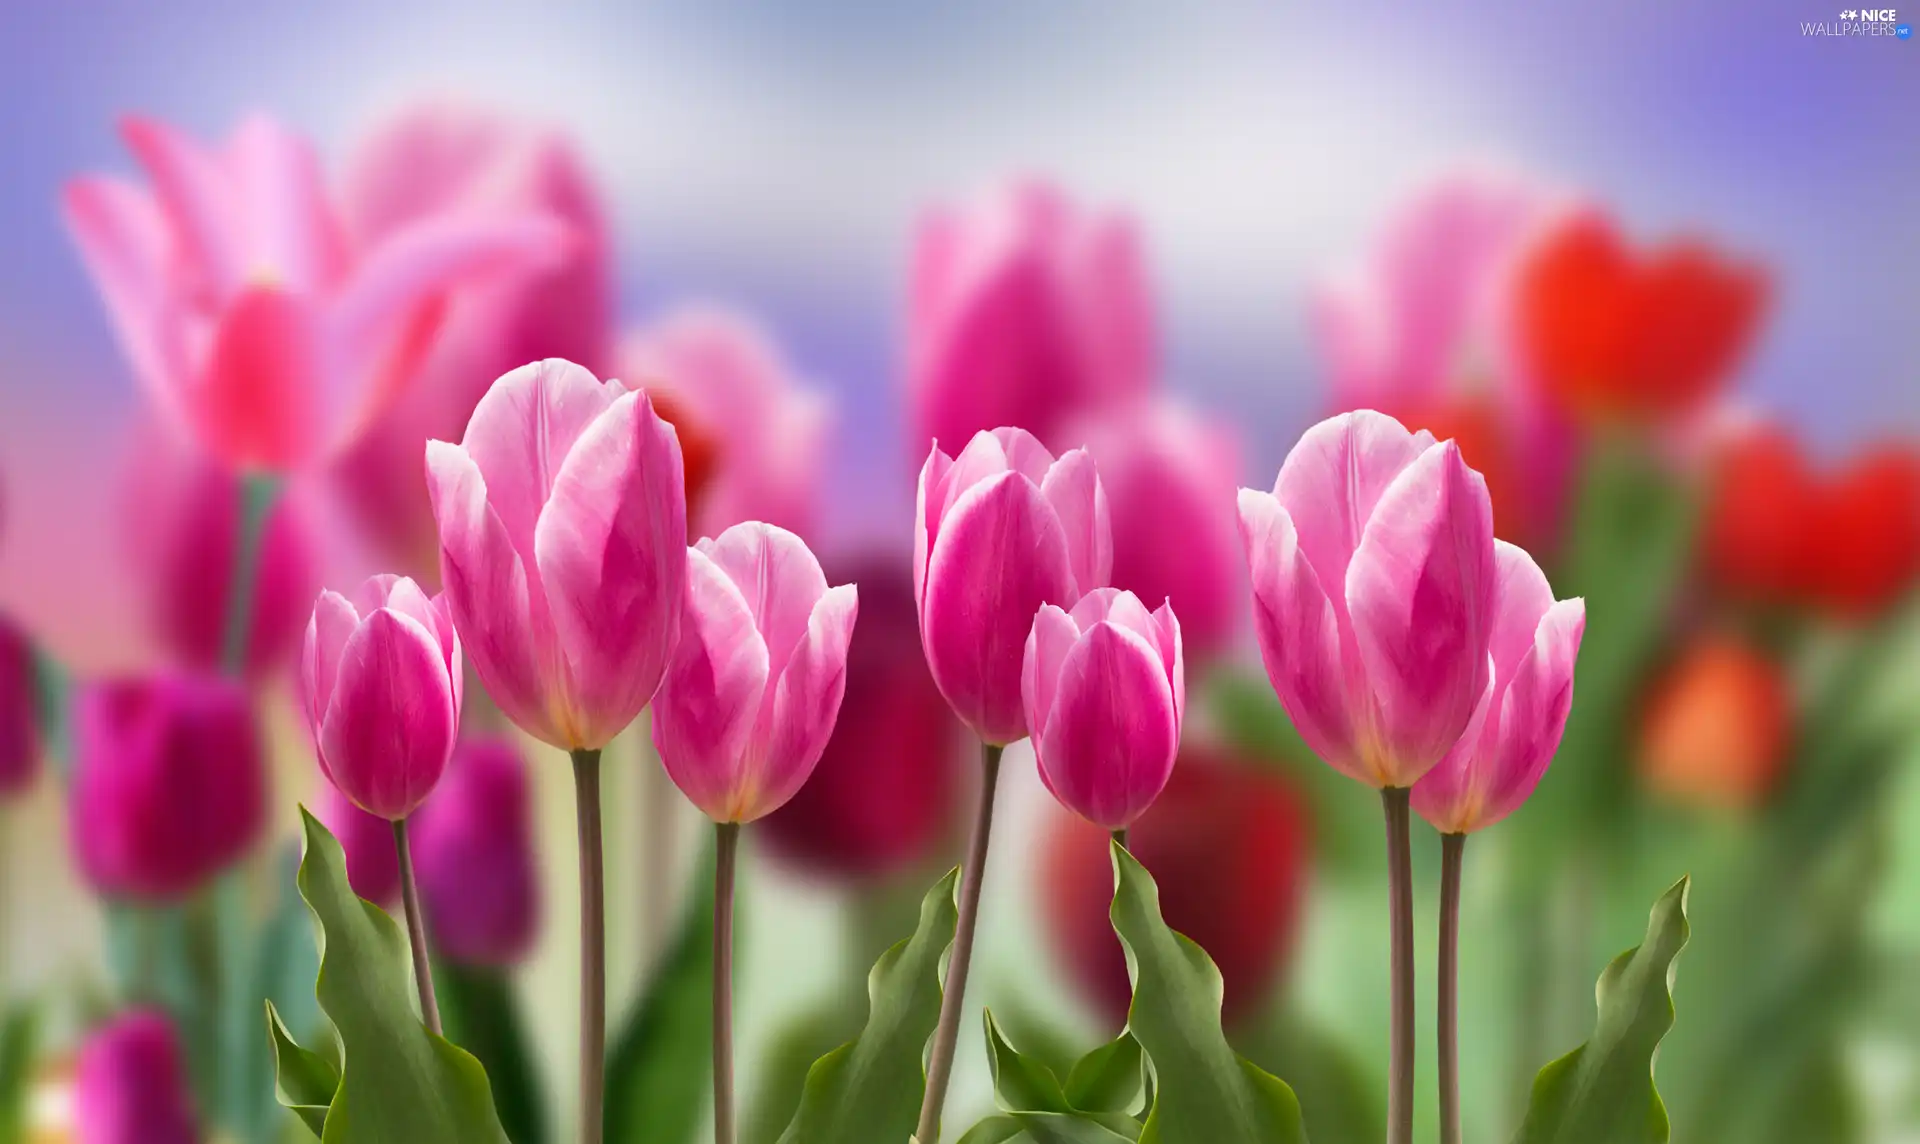 Flowers, Tulips, blur, white and pink